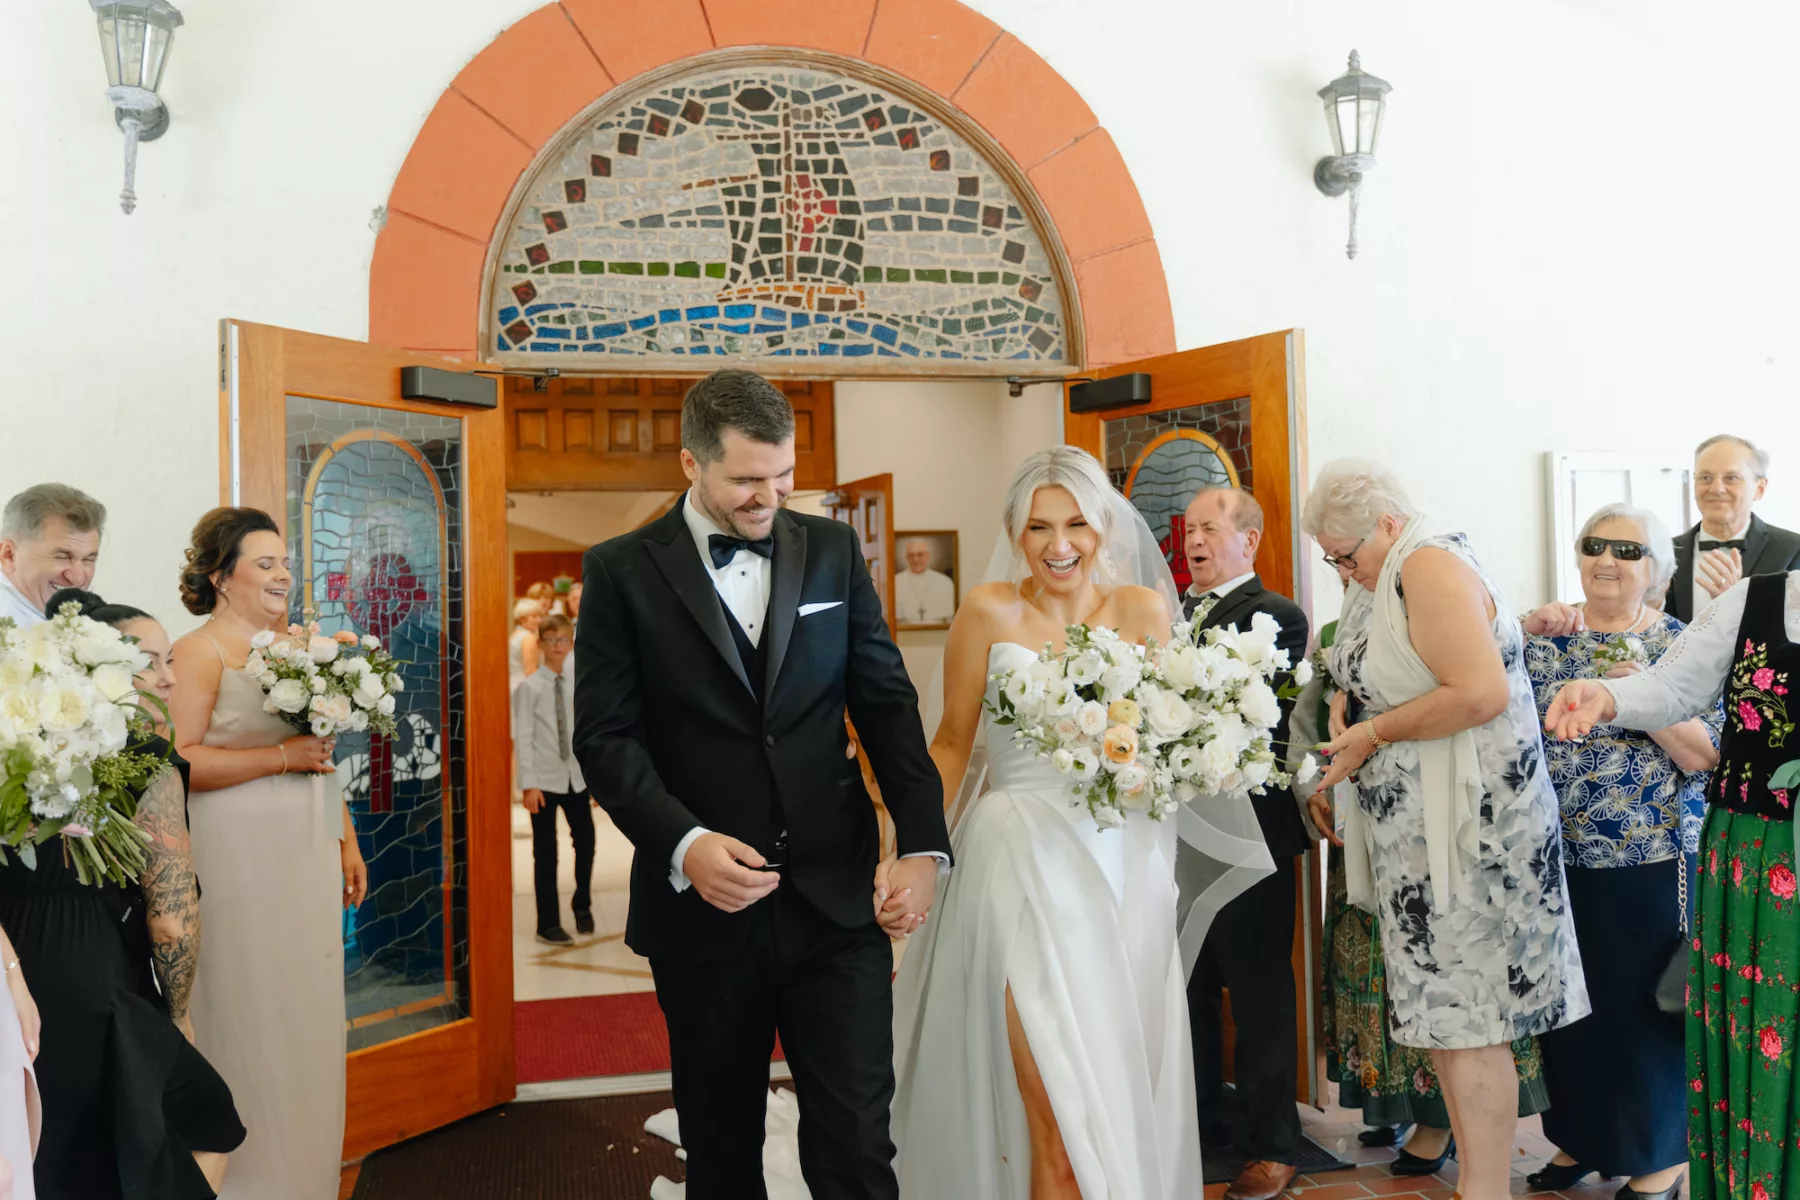 Bride and Groom Just Married Wedding Portrait | Clearwater Photographer and Videographer J&S Media | Tampa Bay Content Creator Behind The Vows